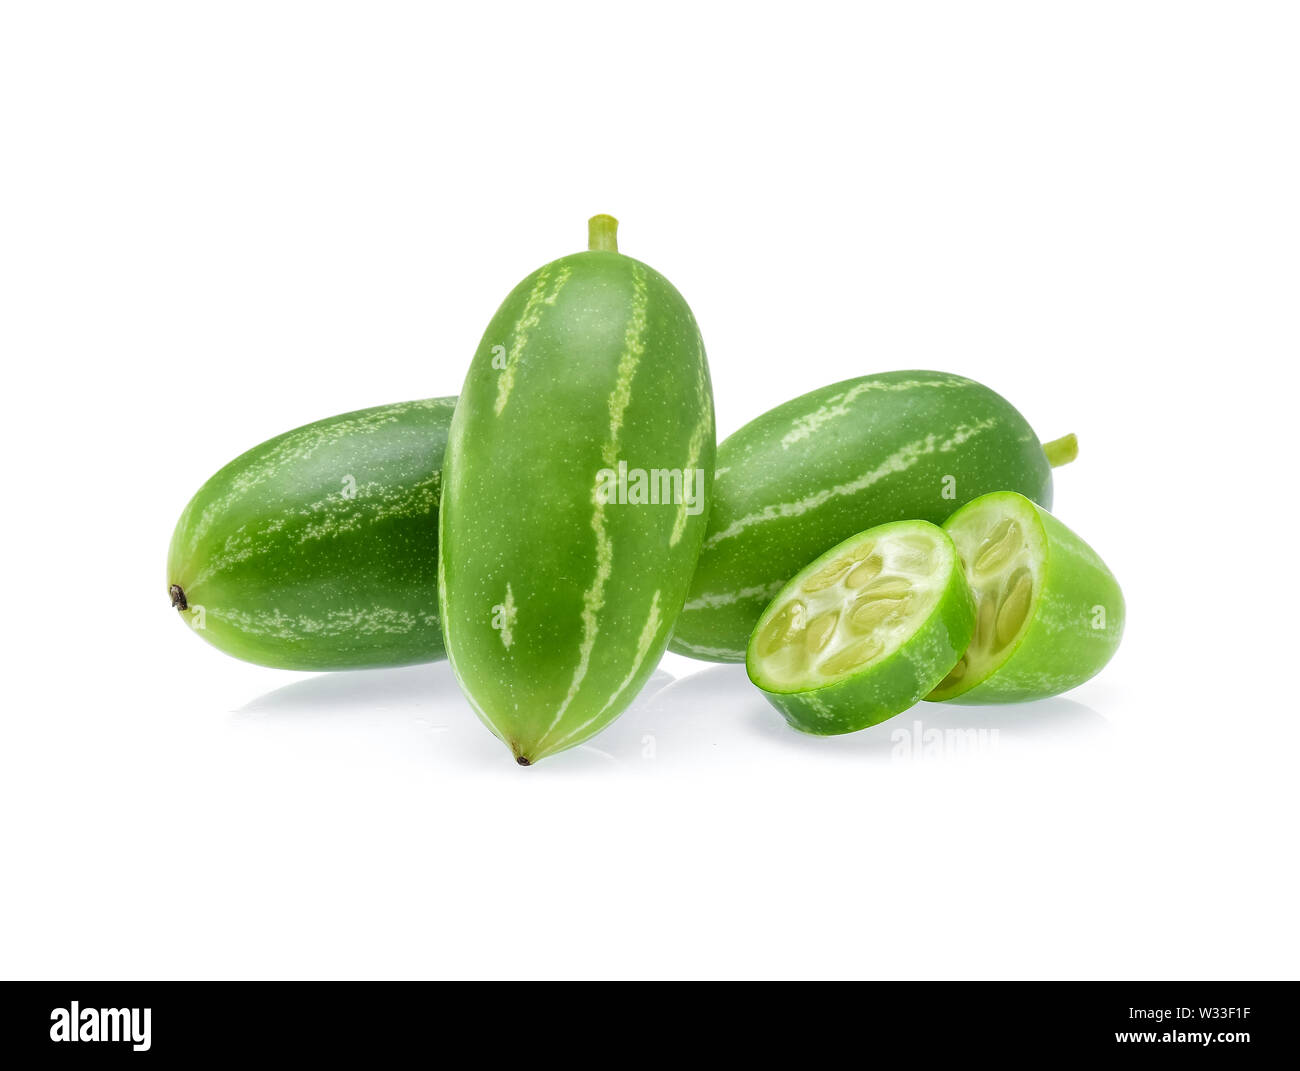 Ivy gourd, Coccinia grandis, Family Cucurbitaceae from central of Thailand Stock Photo